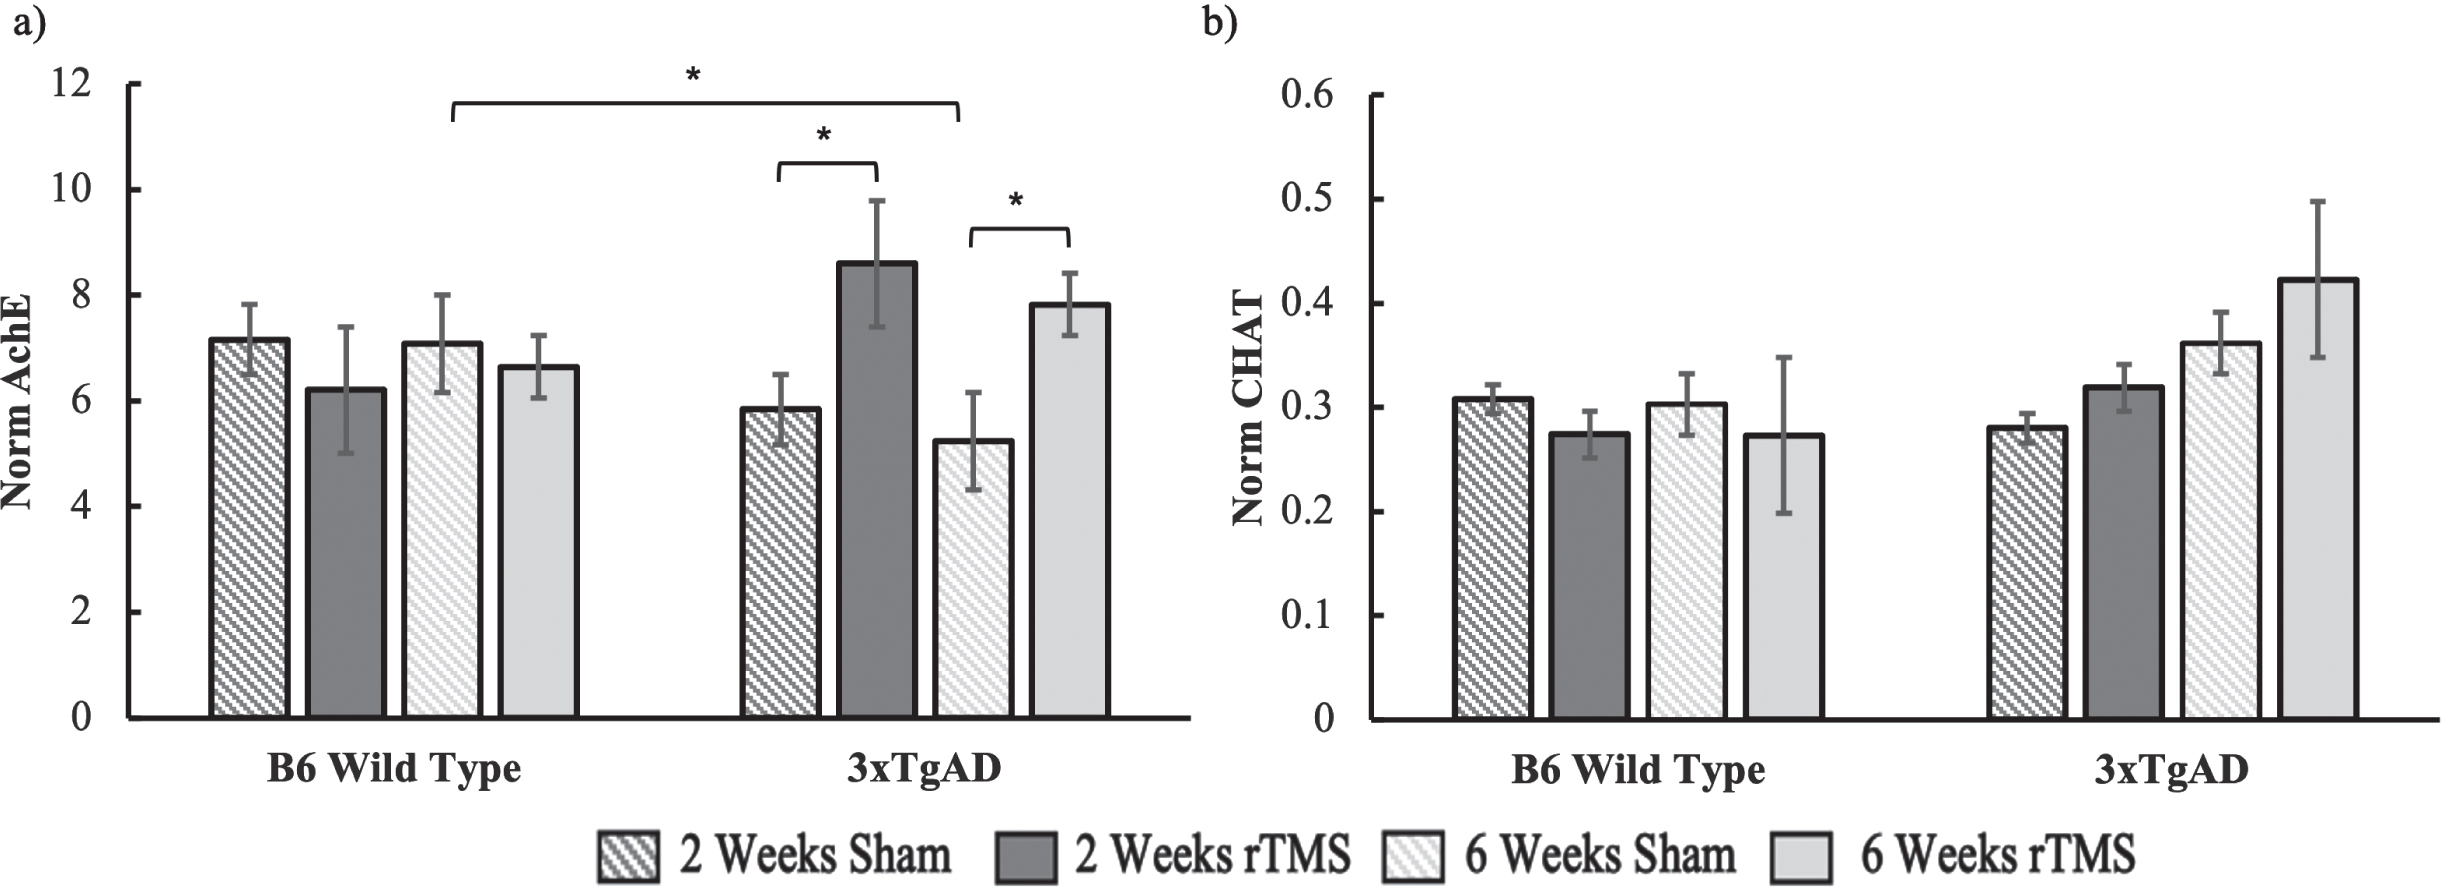 a) AChE and b) ChAT activity for both the B6 and 3xTgAD mice in the 2-week and 6-week groups. Error bars represent the standard error; *p < 0.05. Sample size per group are as follows: B6 rTMS 2 weeks = 15, B6 Sham 2 weeks = 13, B6 rTMS 6 weeks = 14, B6 Sham 6 weeks = 12 3xTgAD rTMS 2 weeks = 12, 3xTgAD Sham 2 weeks = 12, 3xTgAD rTMS 6 weeks = 14, 3xTgAD Sham 6 weeks = 11.